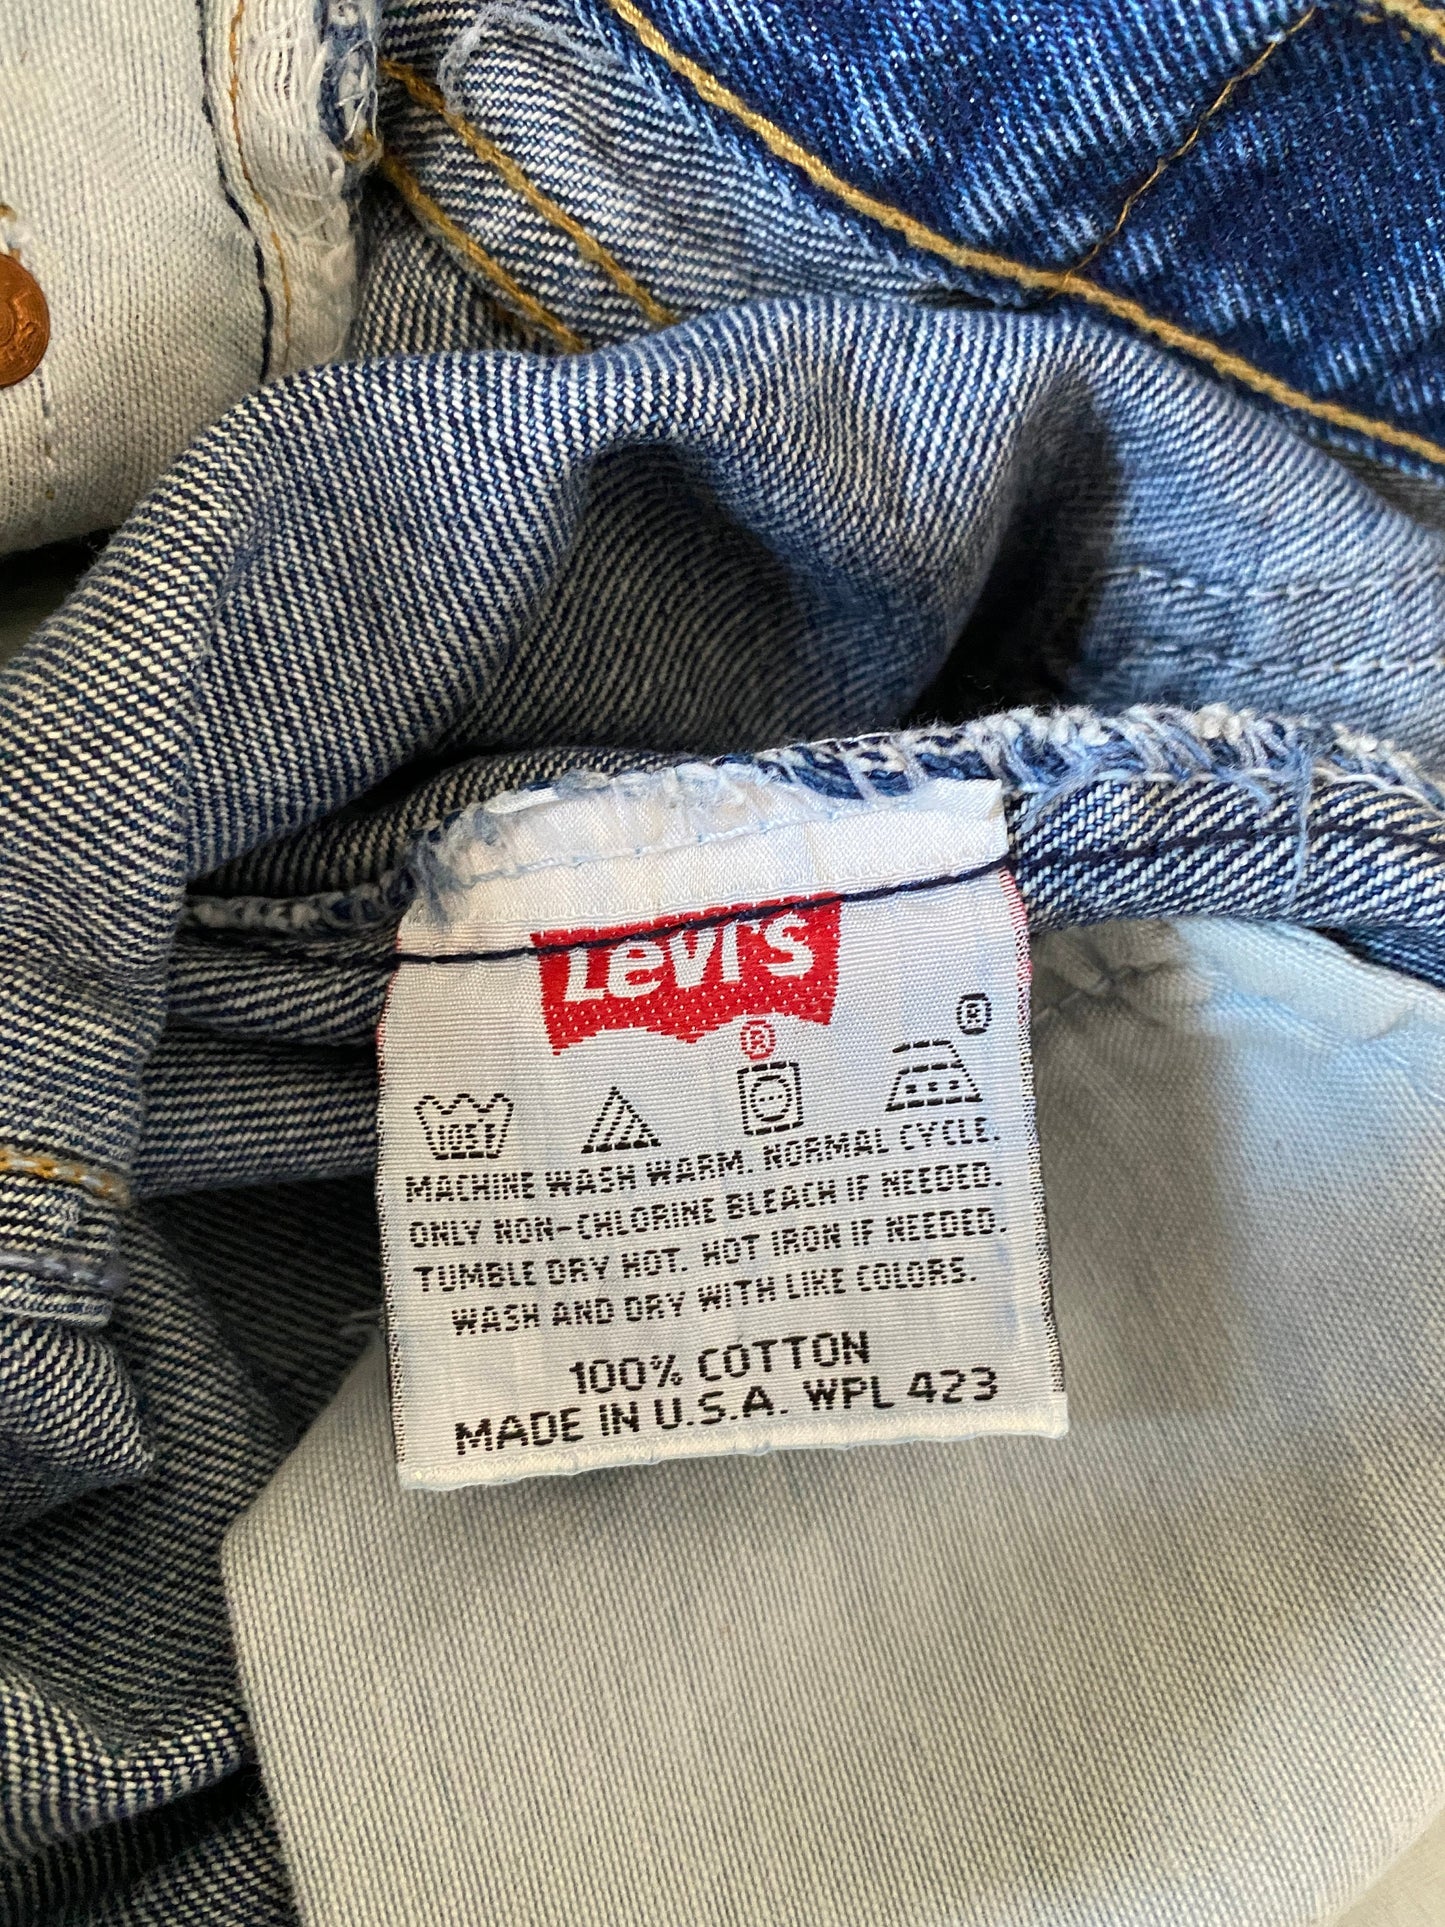 29X36 Levis 501 vintage NOS Made in USA